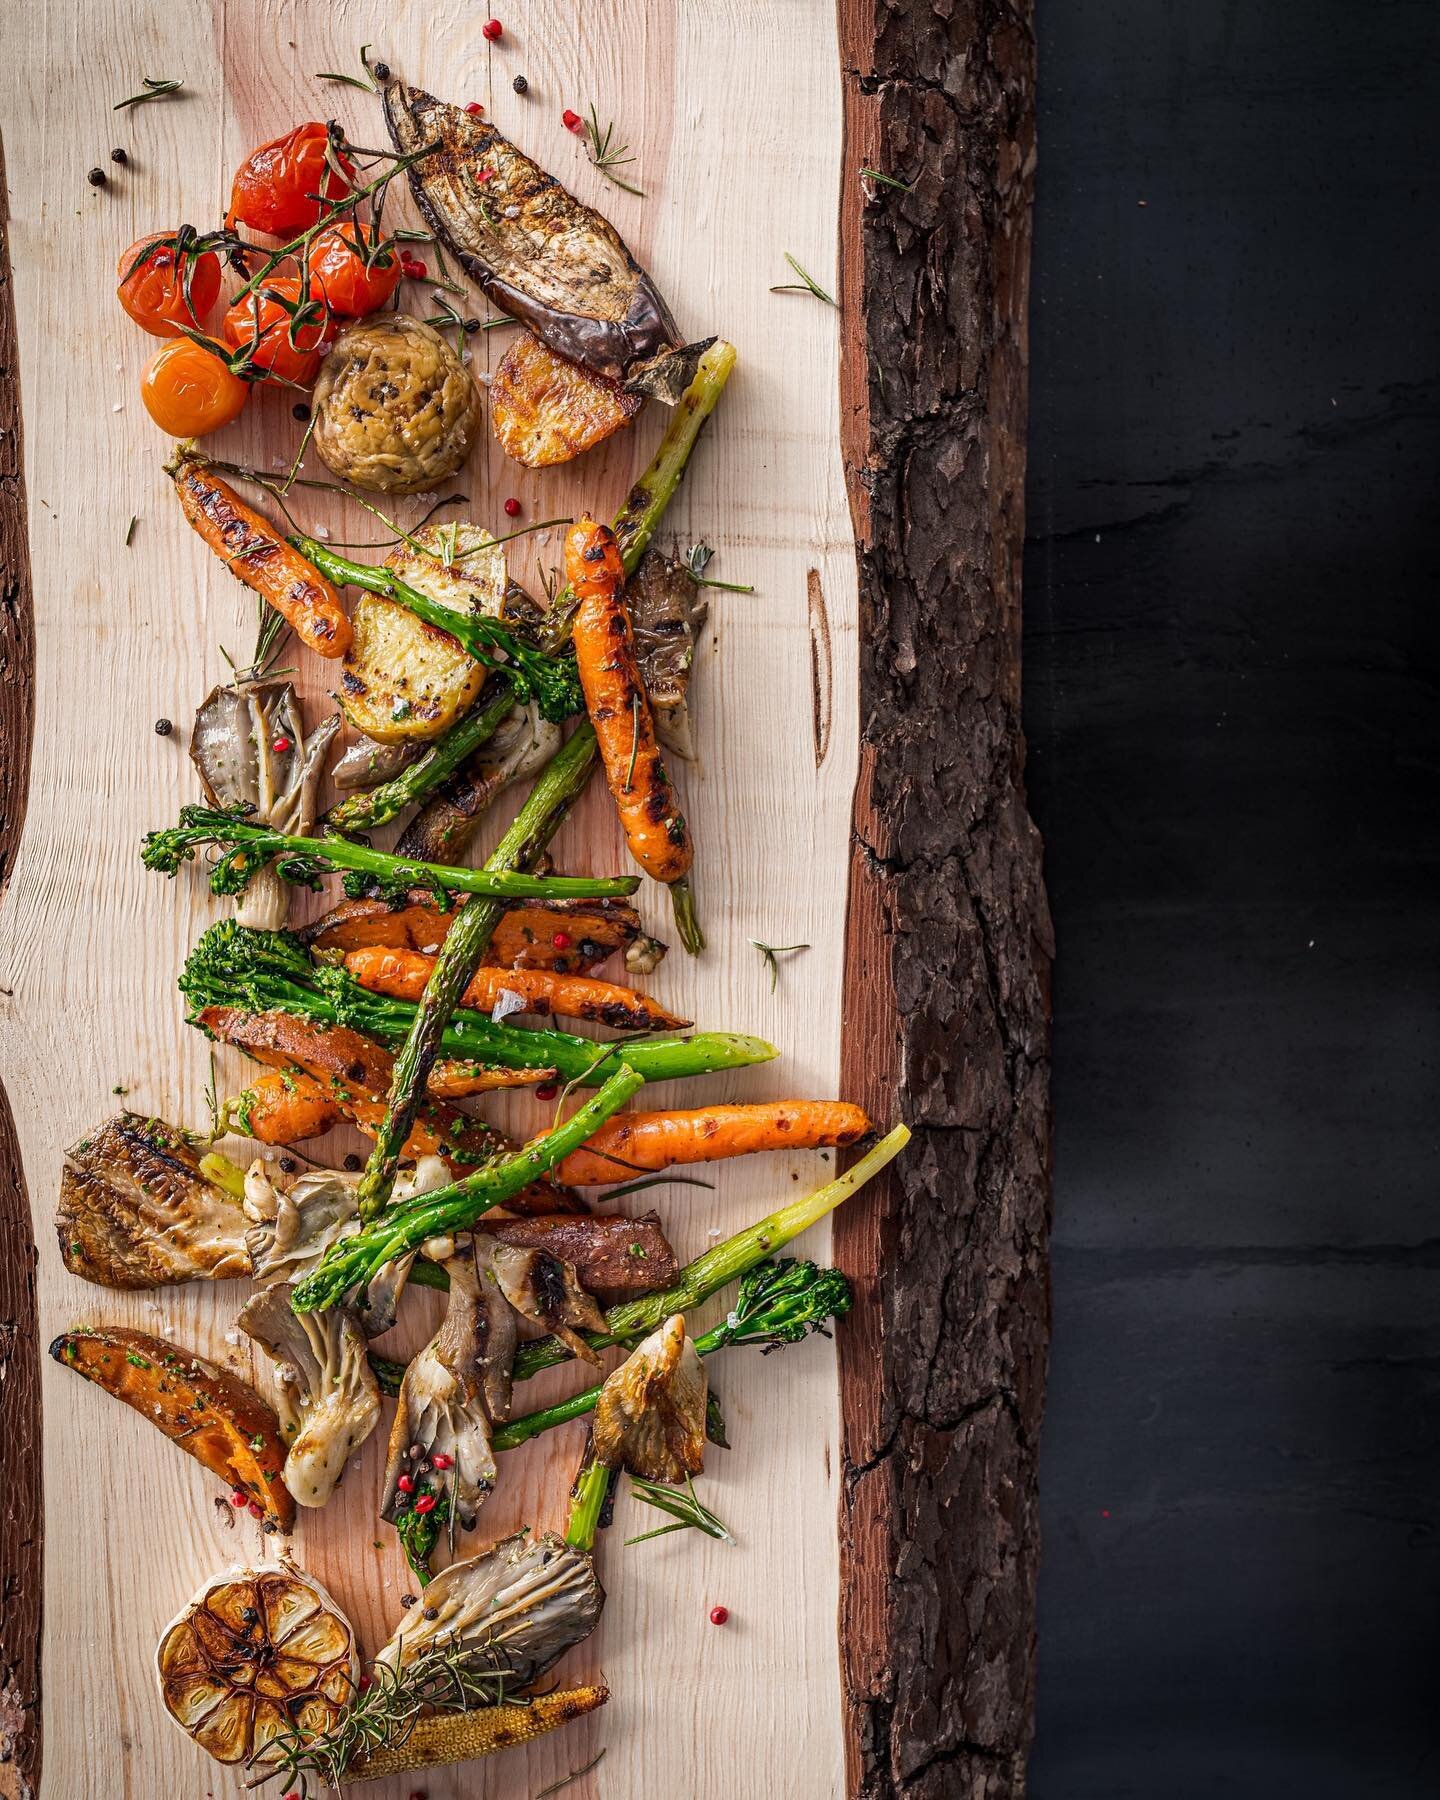 New in | Grilled Vegetables 🥕🥦🍆
Experience a healthy, light dining experience in a relaxed atmosphere 🔥 #ArgentinianGrill